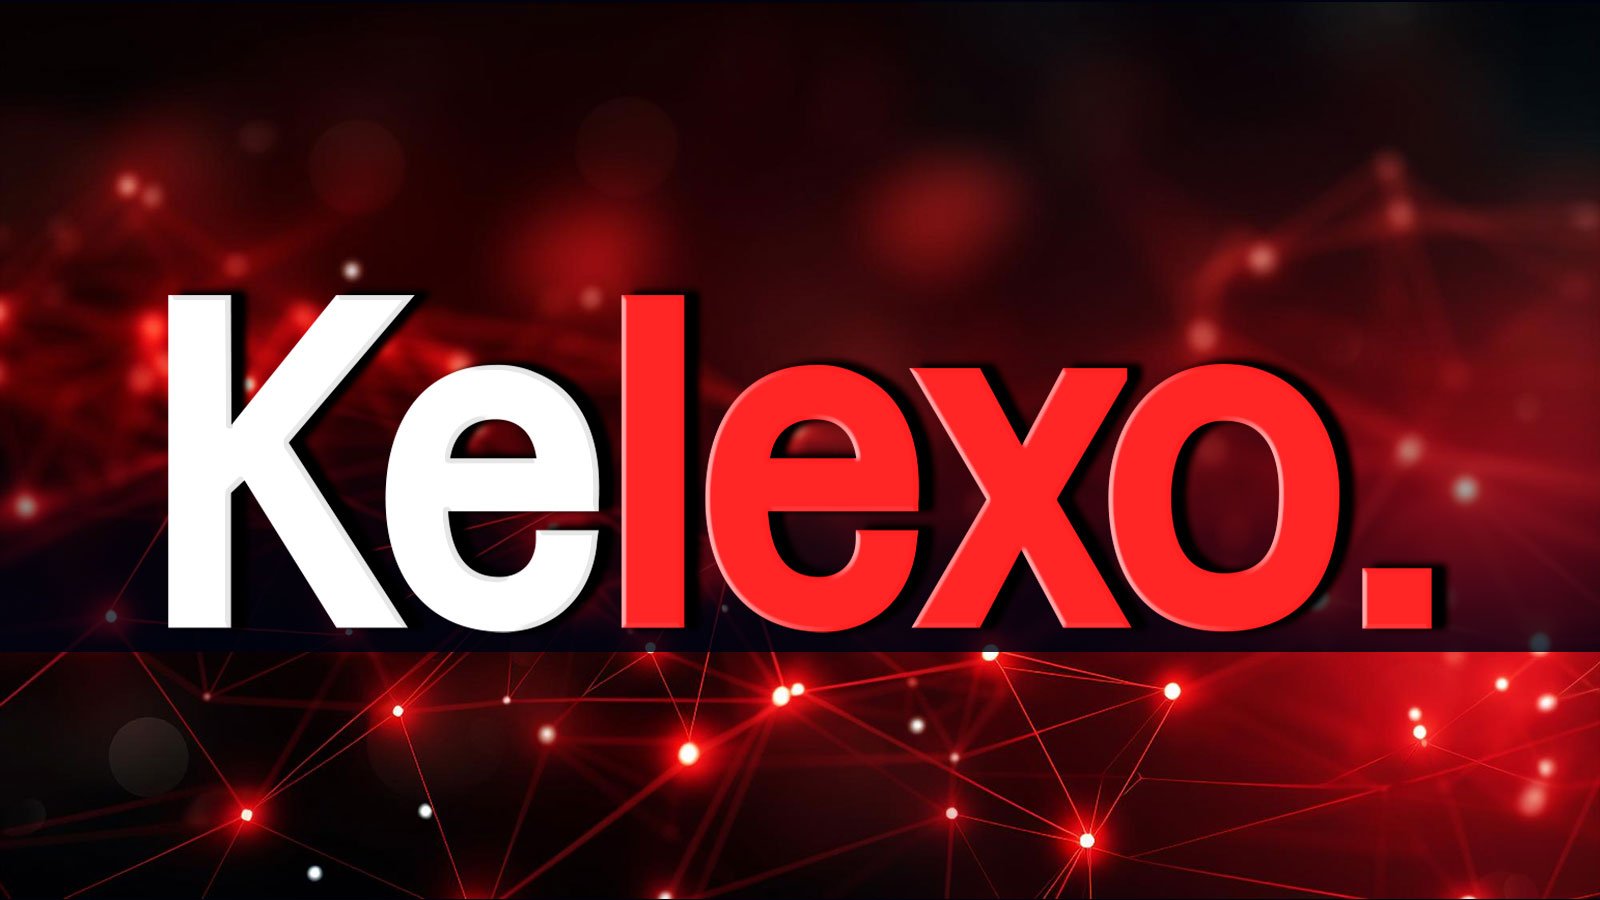 Kelexo (KLXO) Tokensale Gaining Steam in March as Solana (SOL), Bitcoin Cash (BCH) Top Altcoins Surging